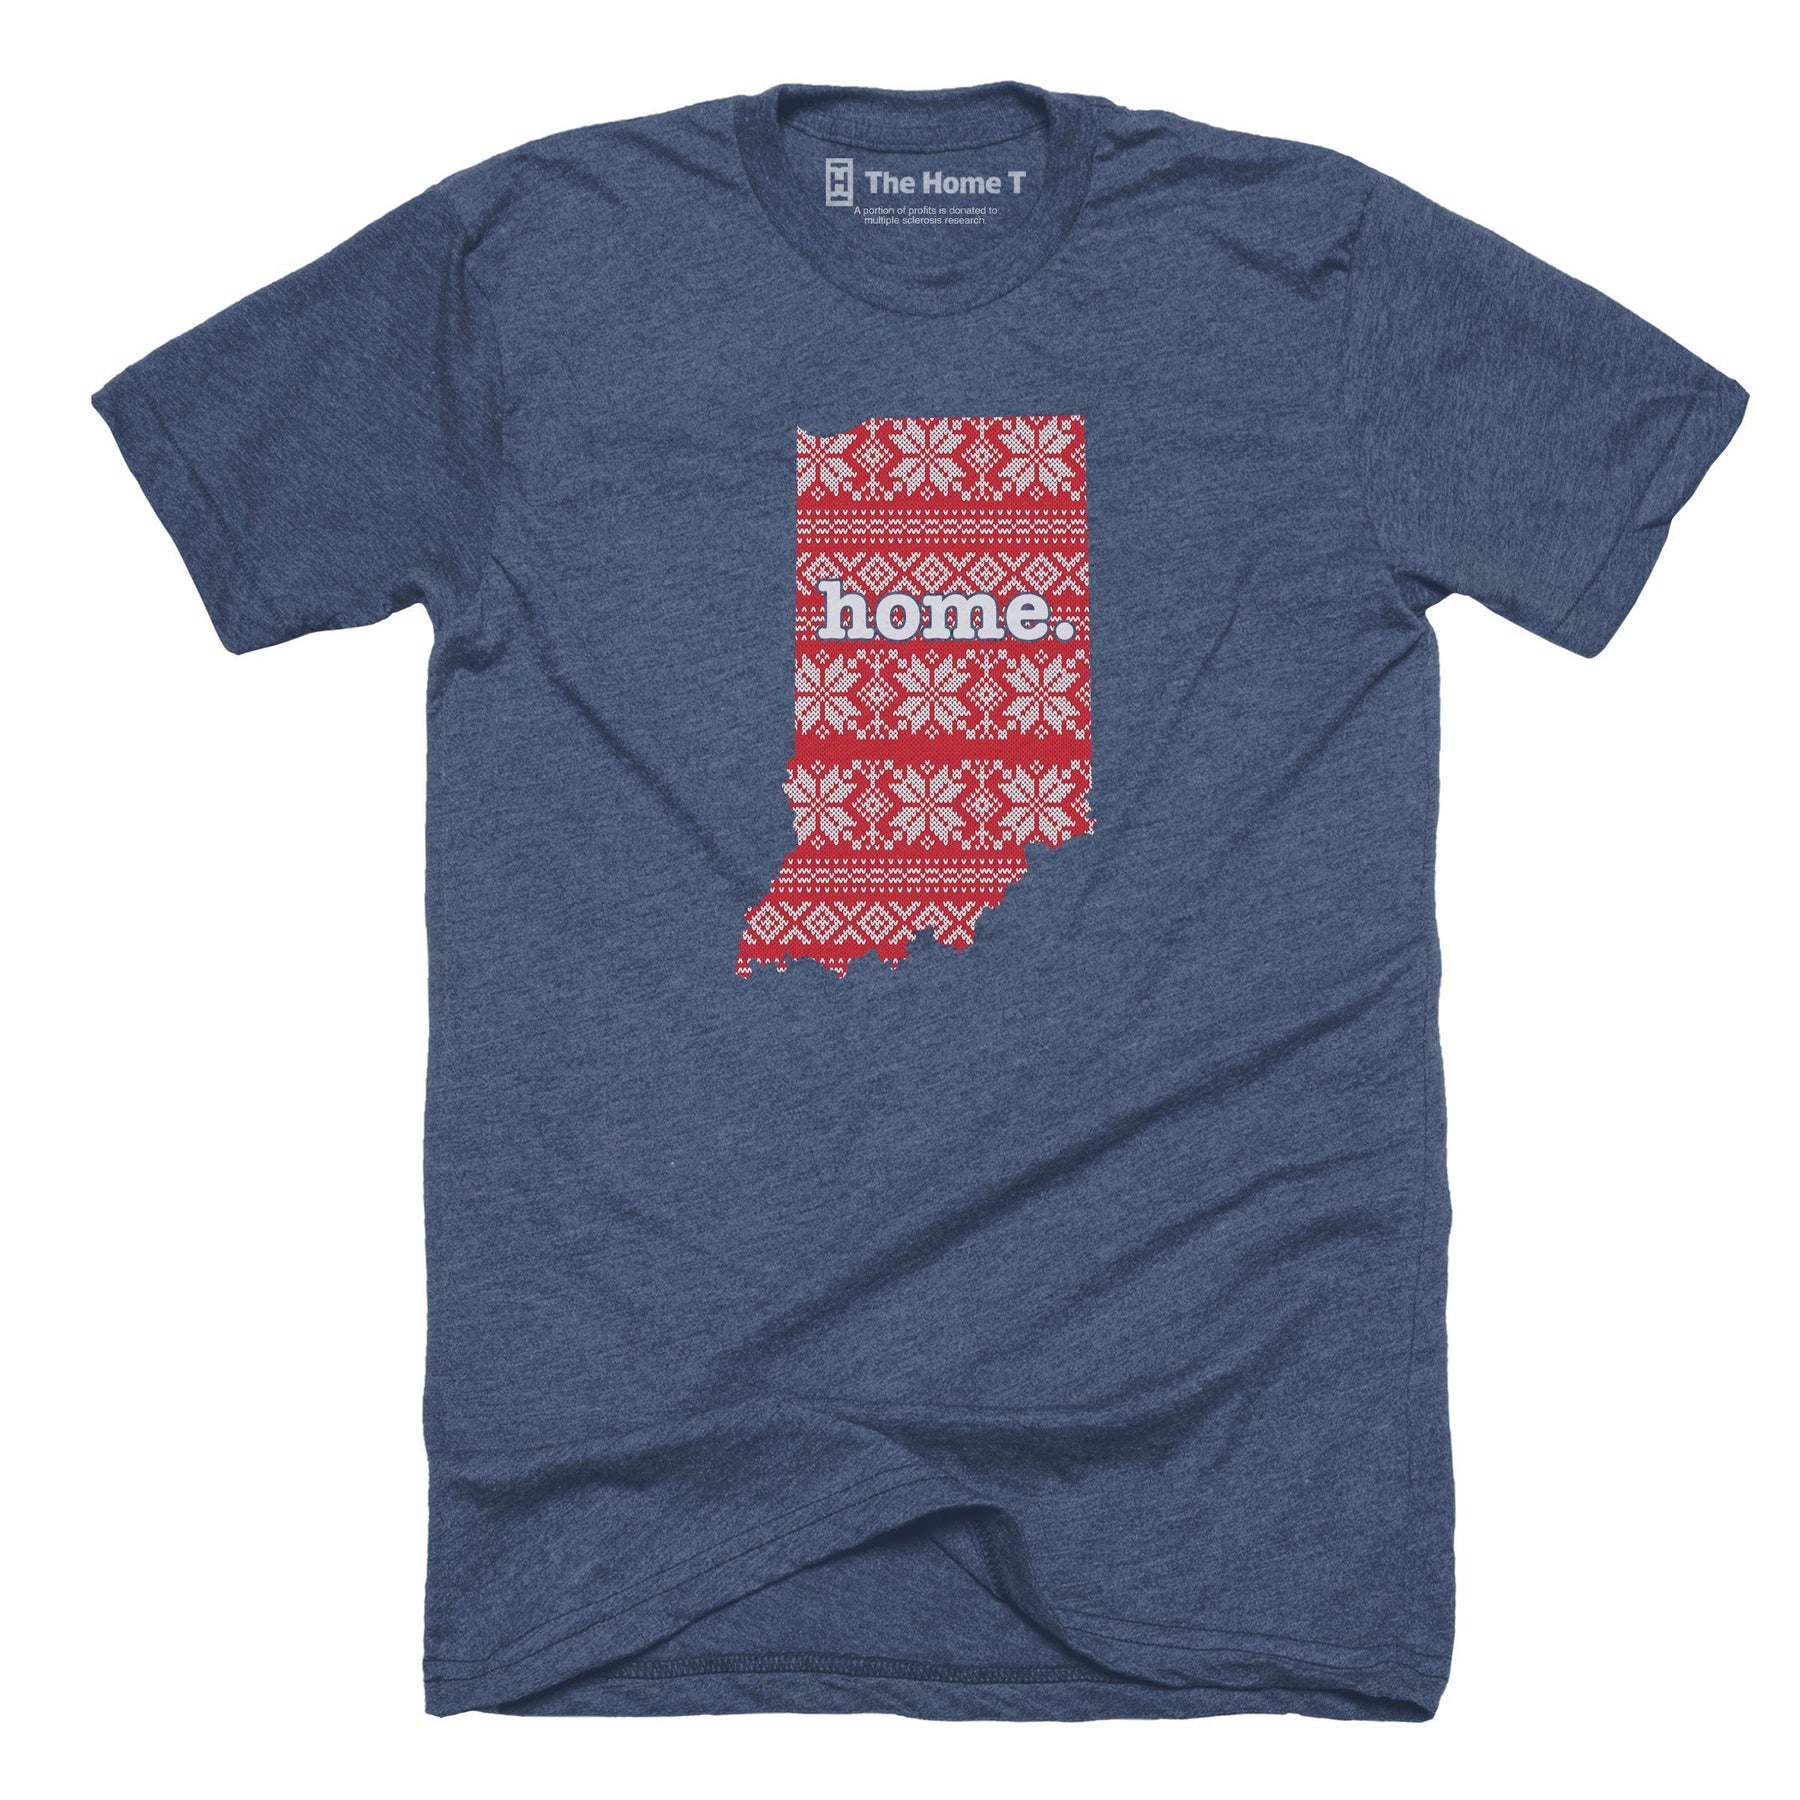 Indiana Christmas Sweater Pattern Christmas Sweater The Home T XS Navy T-Shirt